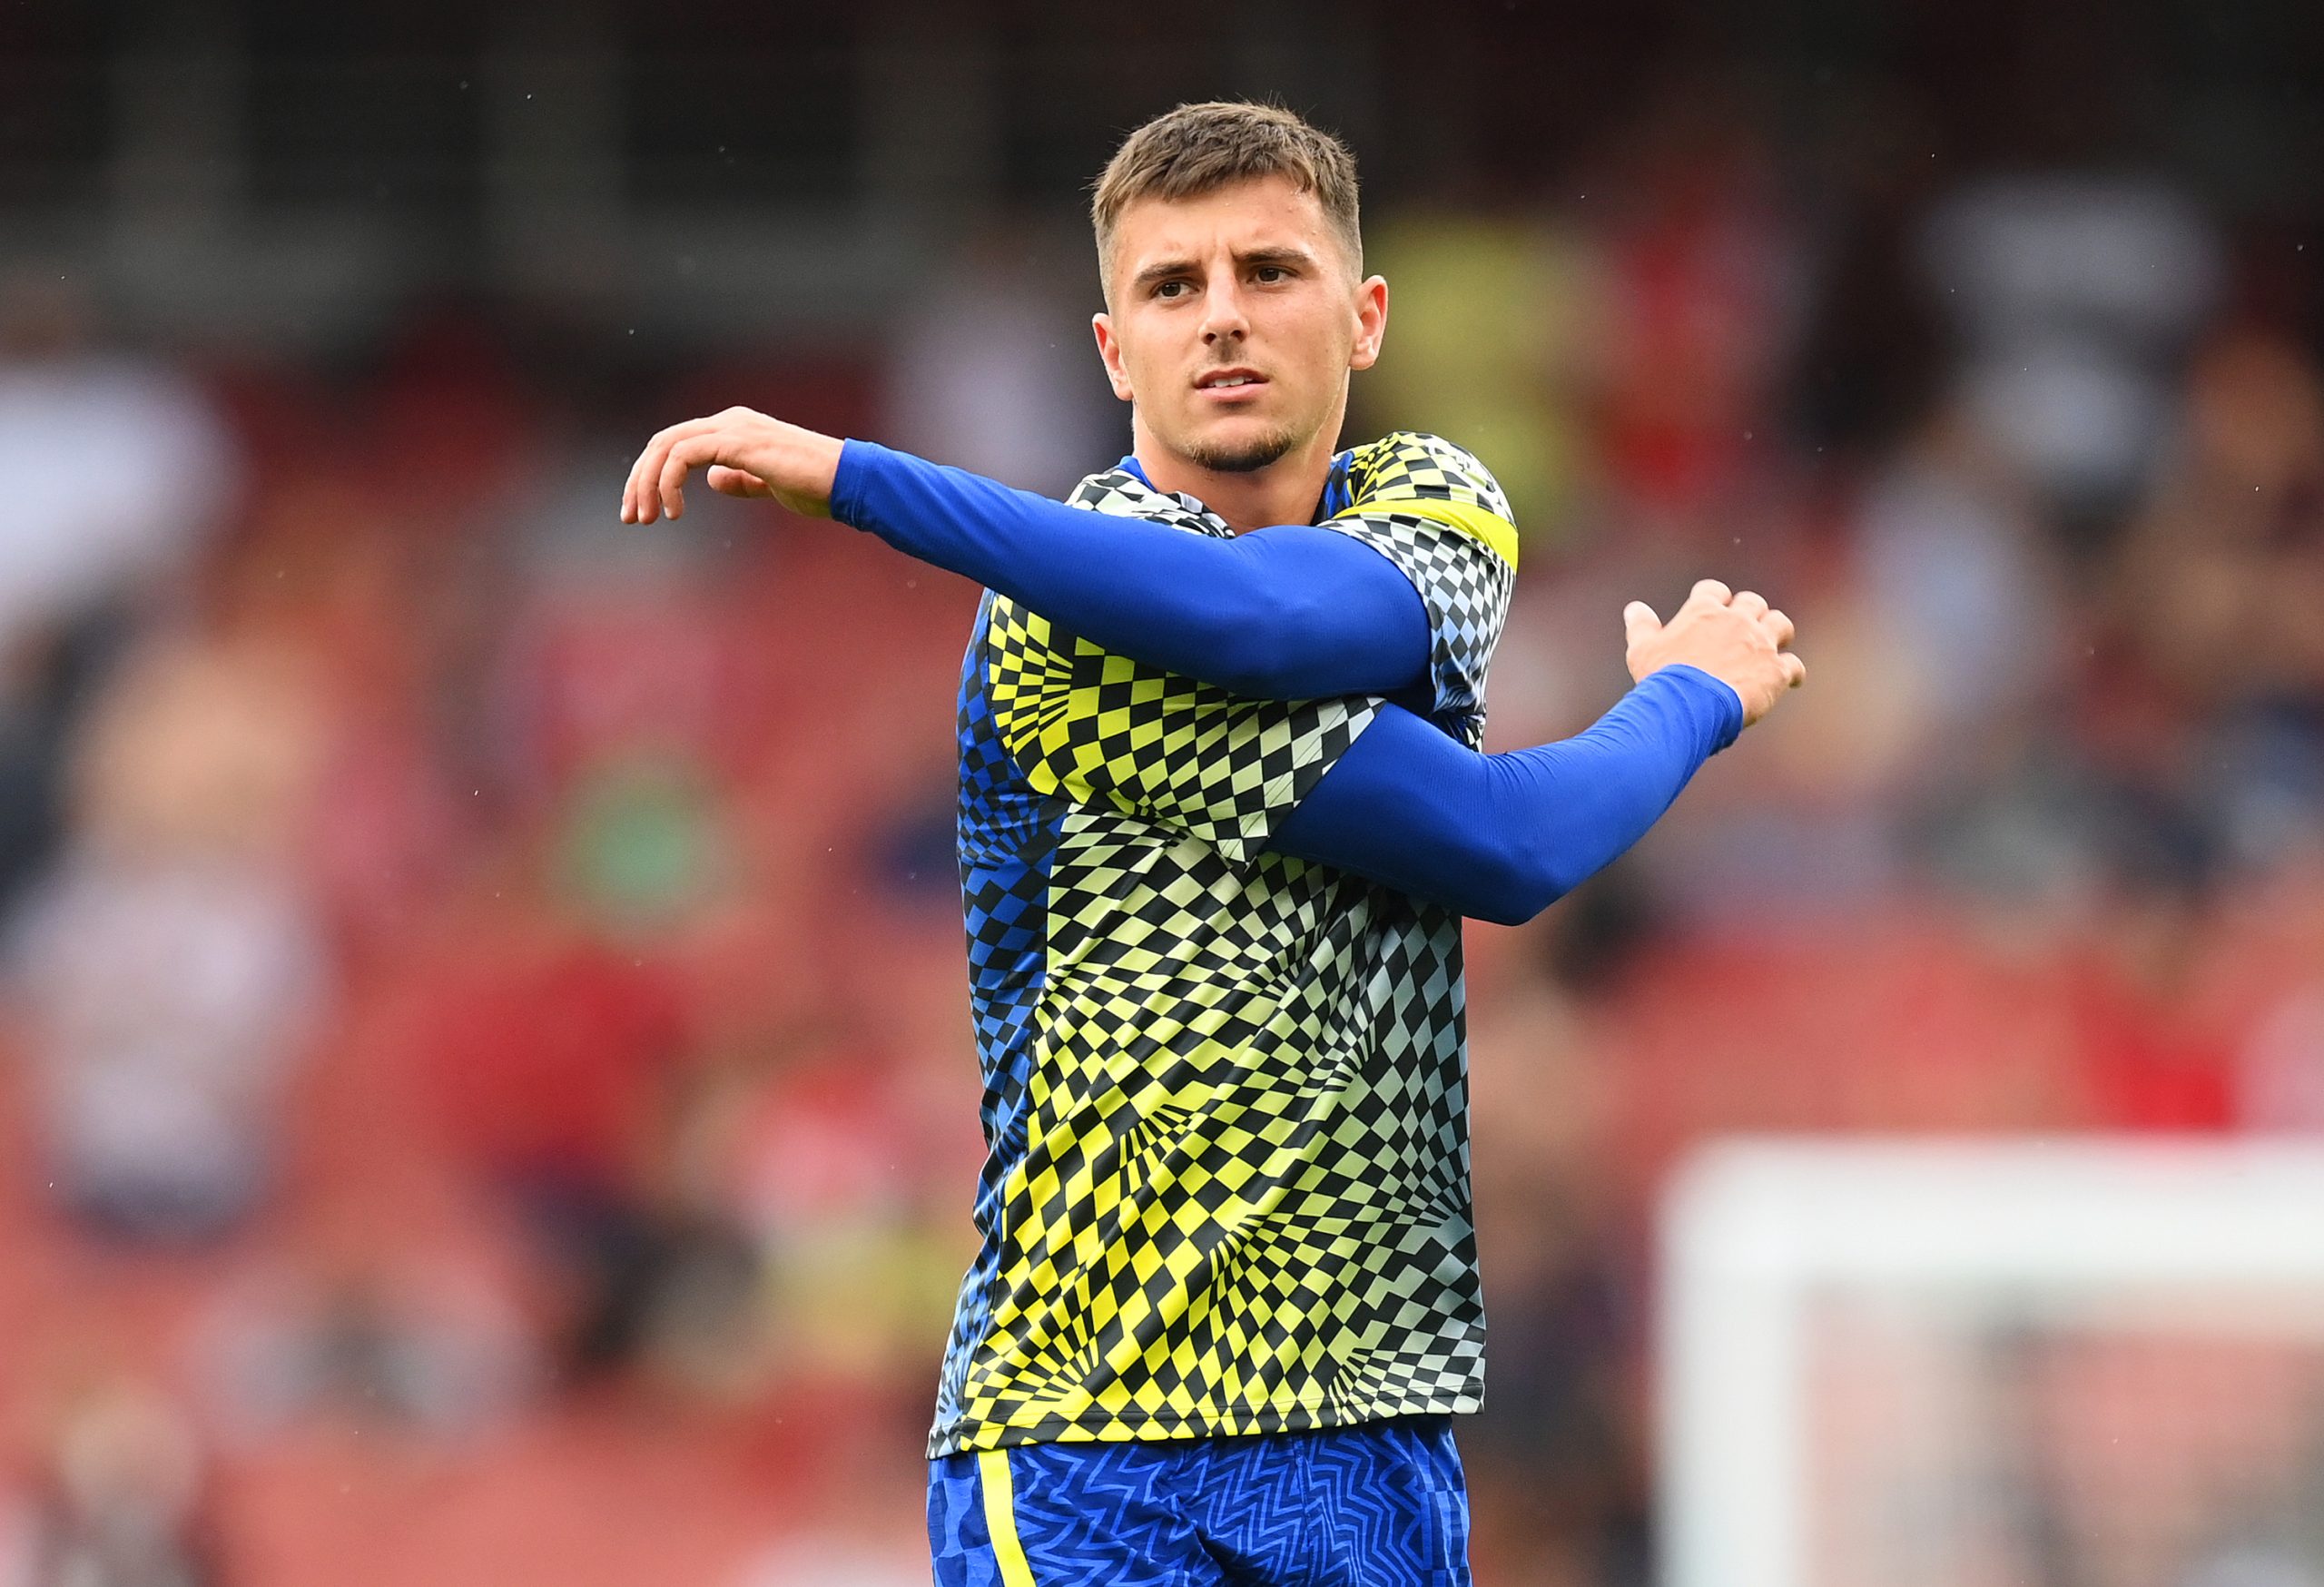 Andy Cole believes Chelsea star Mason Mount won't improve Manchester United.